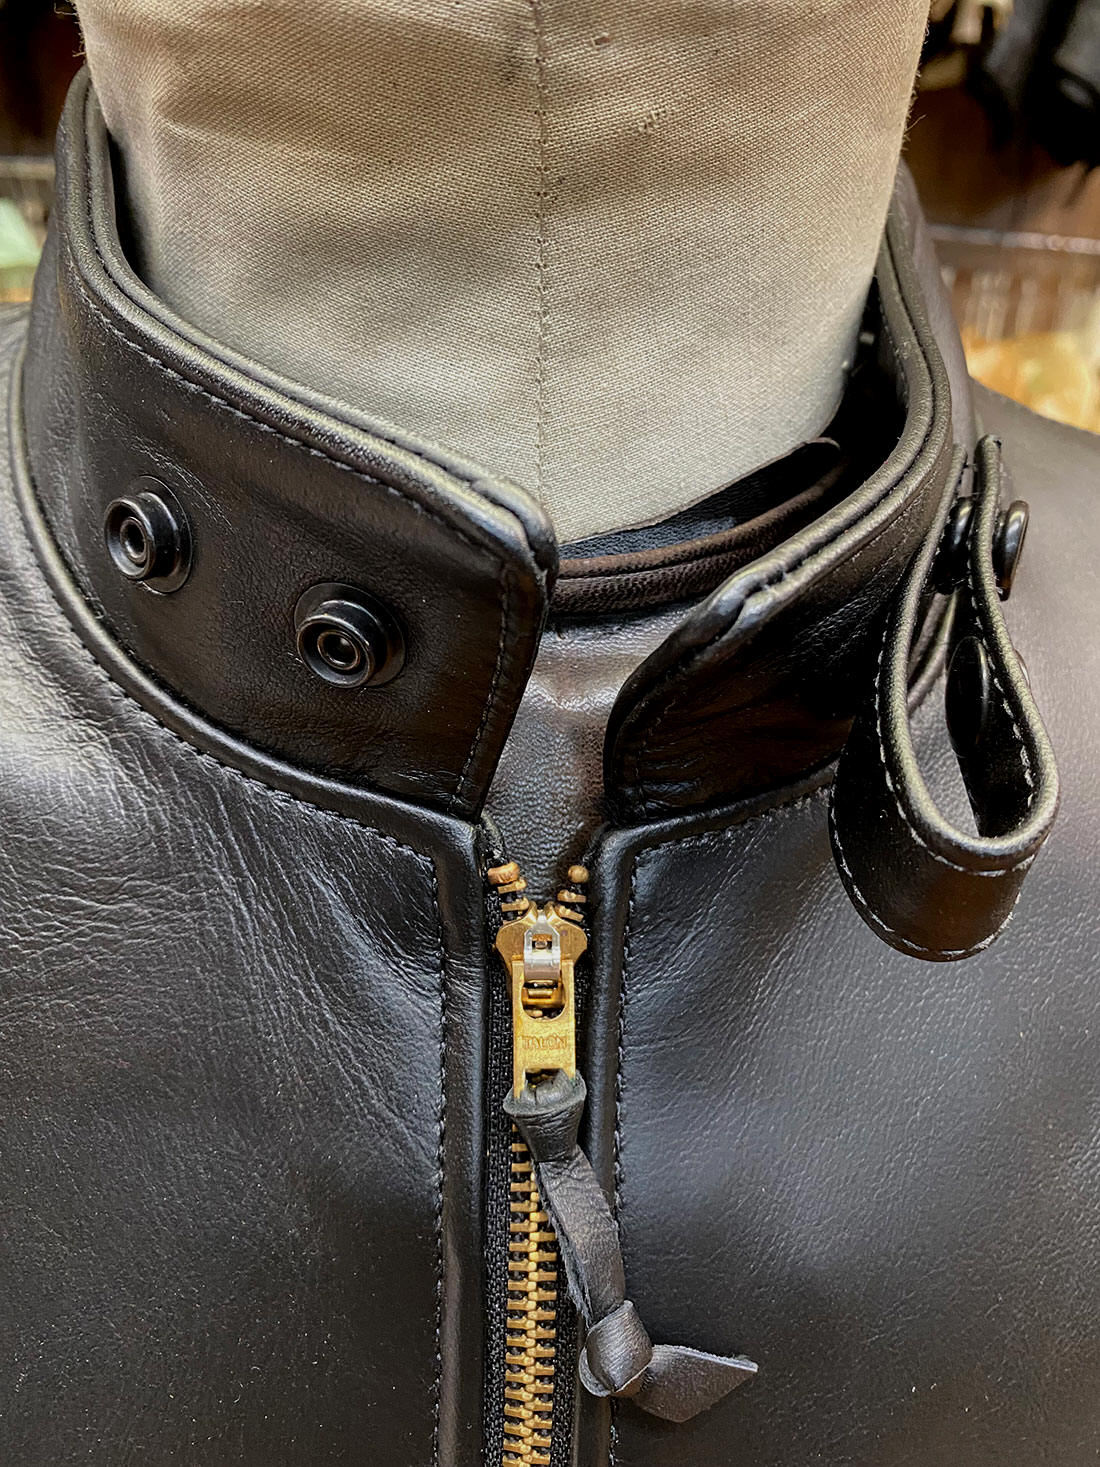 Chrome-tanned LOST WORLDS Horsehide© from our own tannery; 100% Pure ...